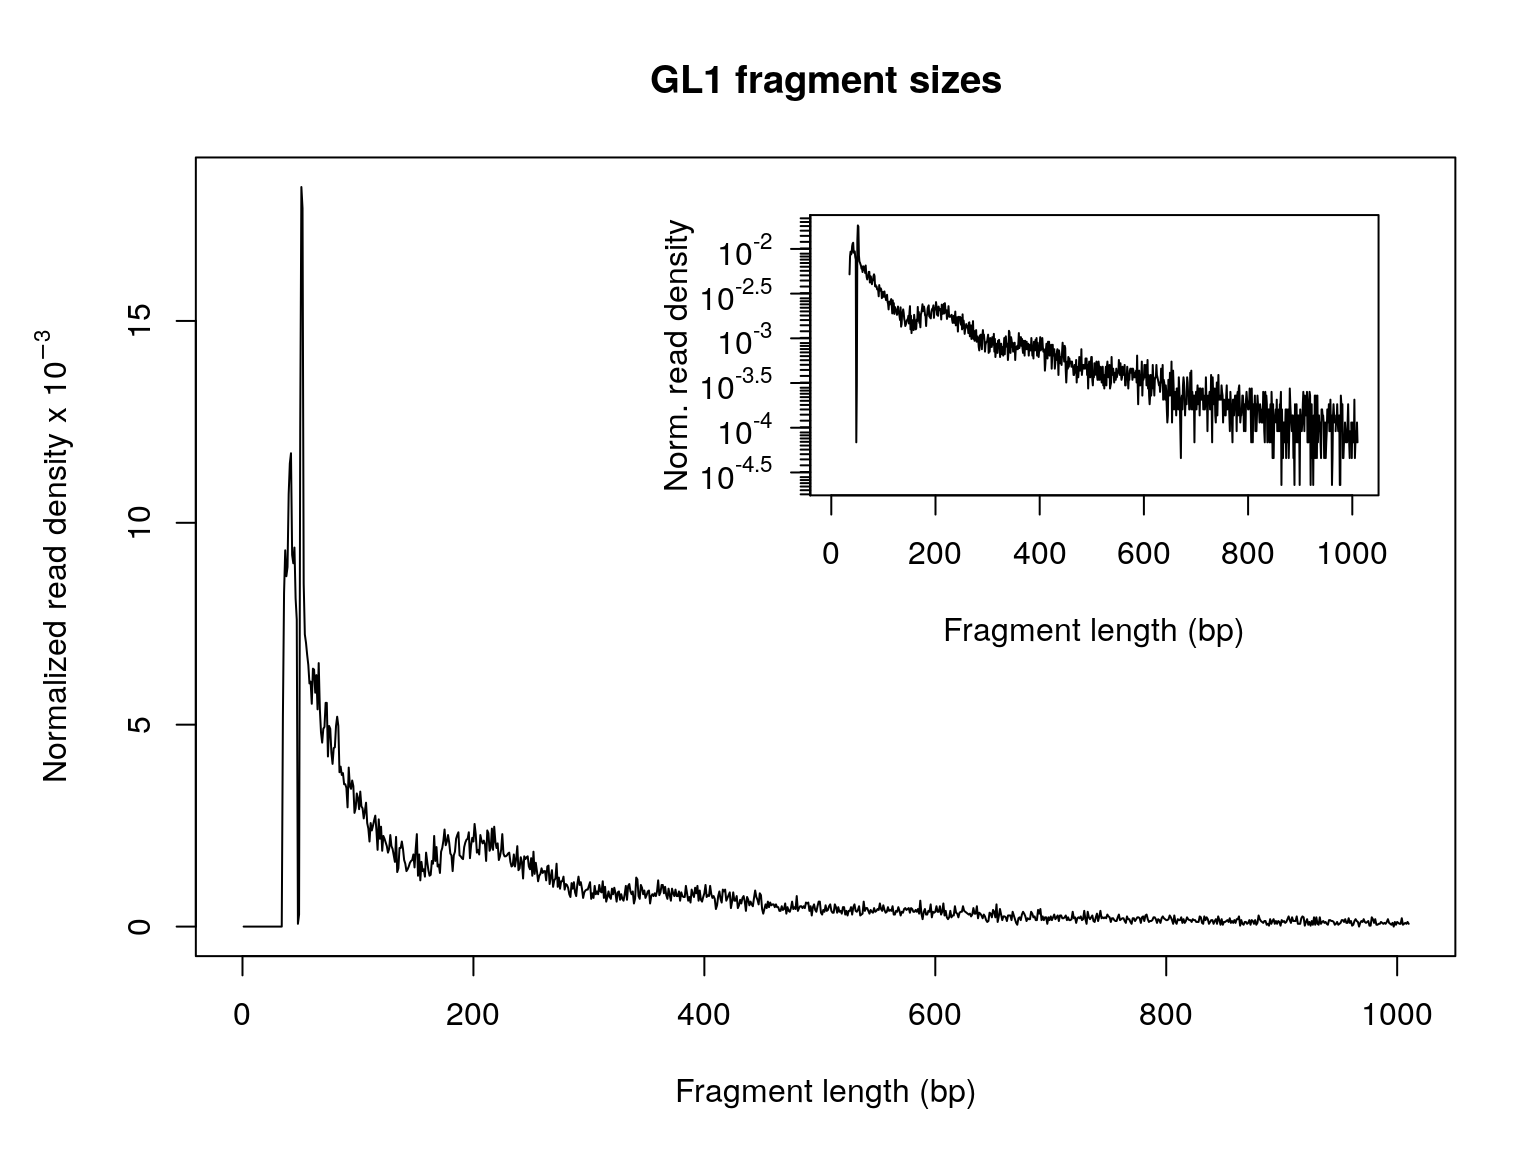 Figure 8. Size distribution of ATAC-seq library insert fragments.